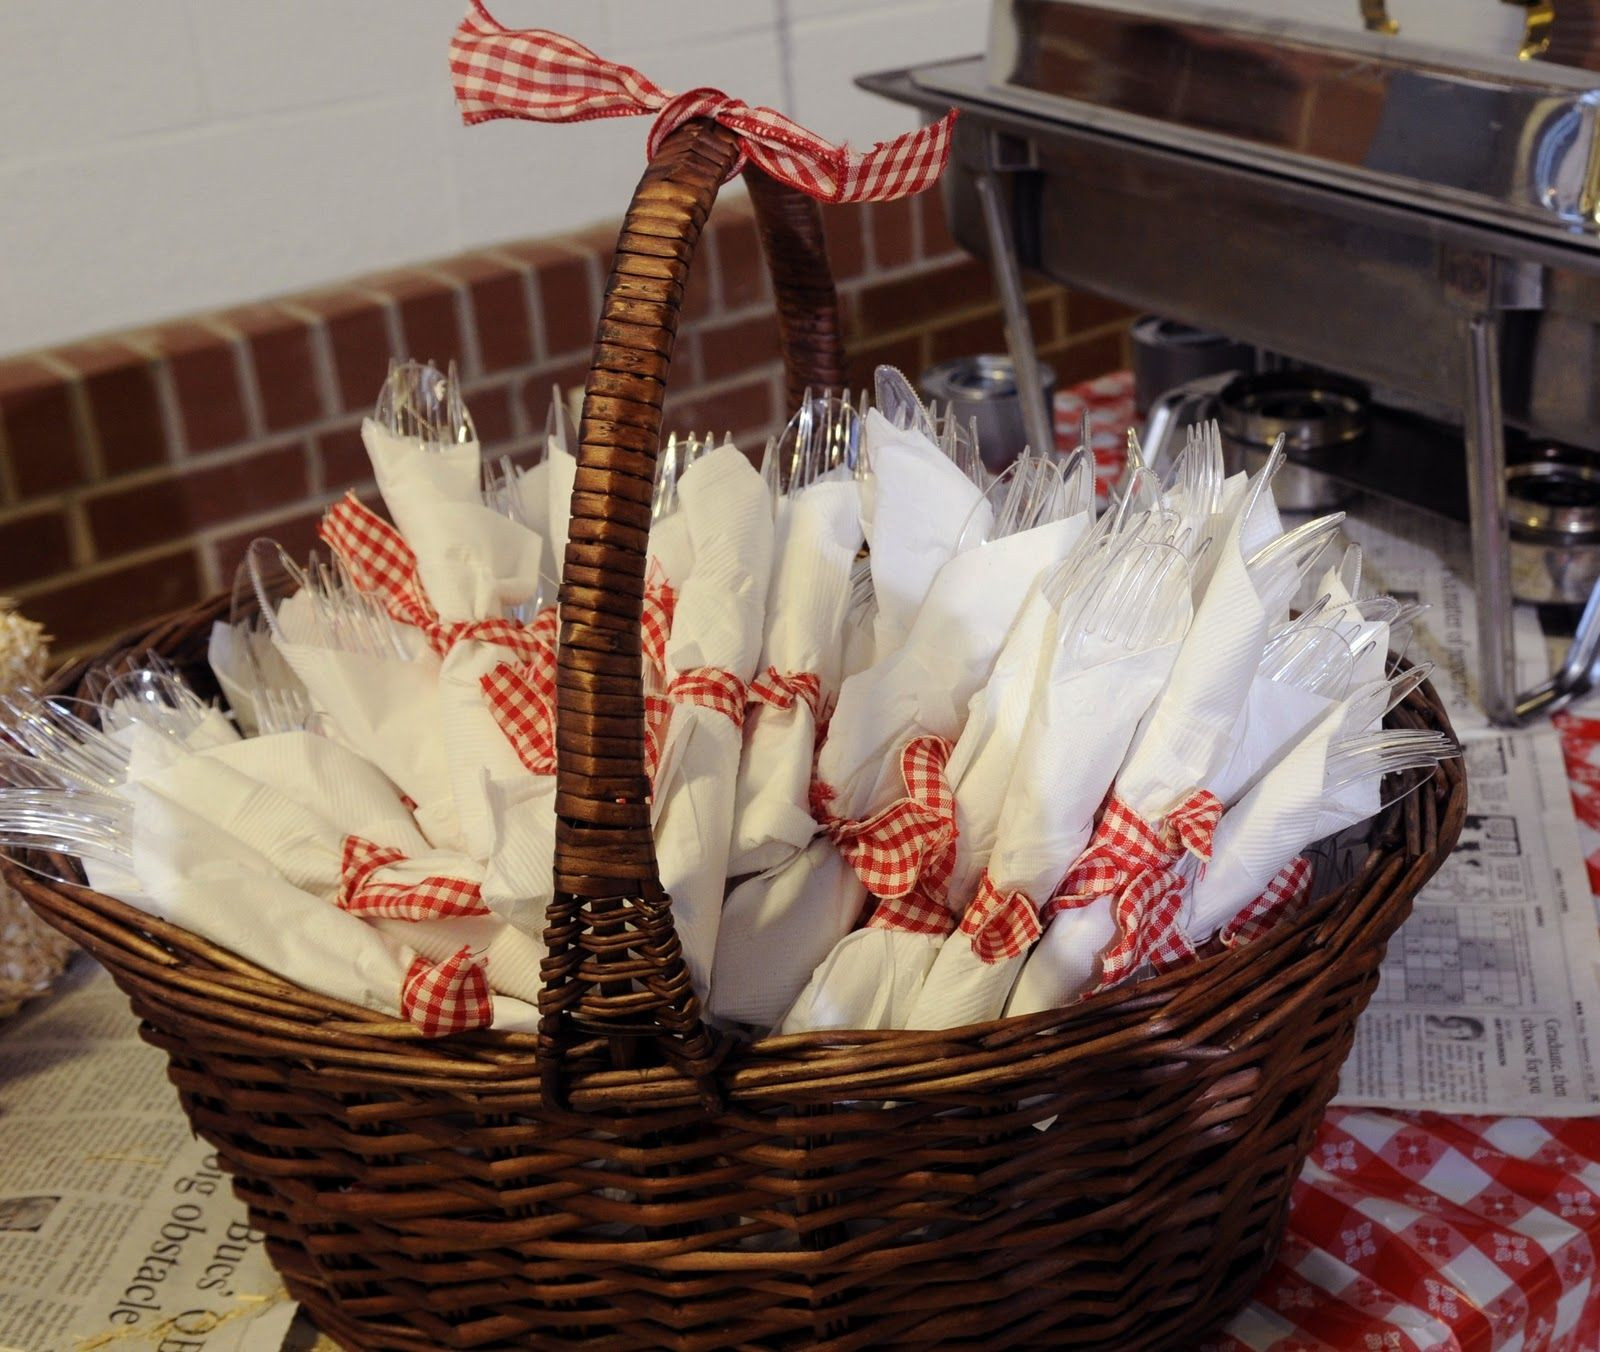 Graduation Party Cookout Ideas
 Napkins tied with red and white gingham ribbon for BBQ or